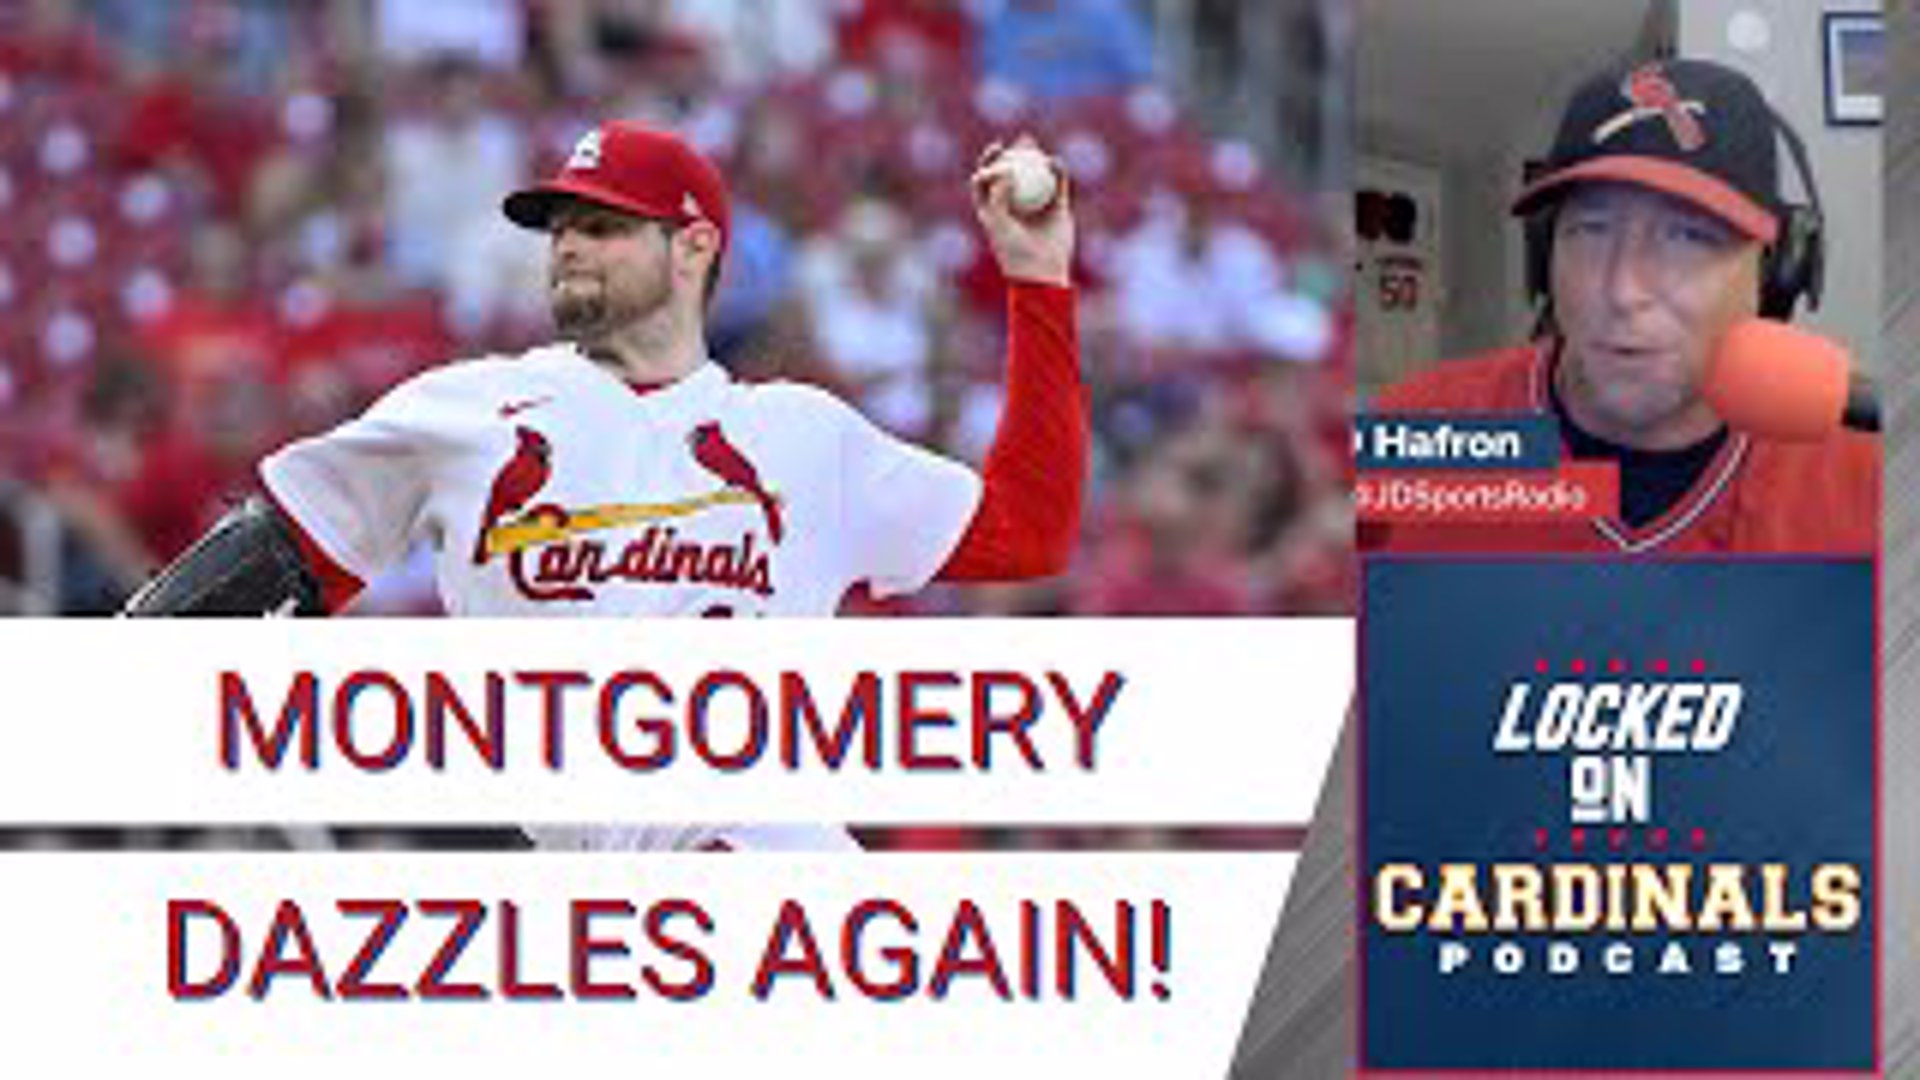 St. Louis Cardinals starting pitcher Jordan Montgomery throws a "Maddux" in a 1-0 complete game shut out over the Chicago Cubs.